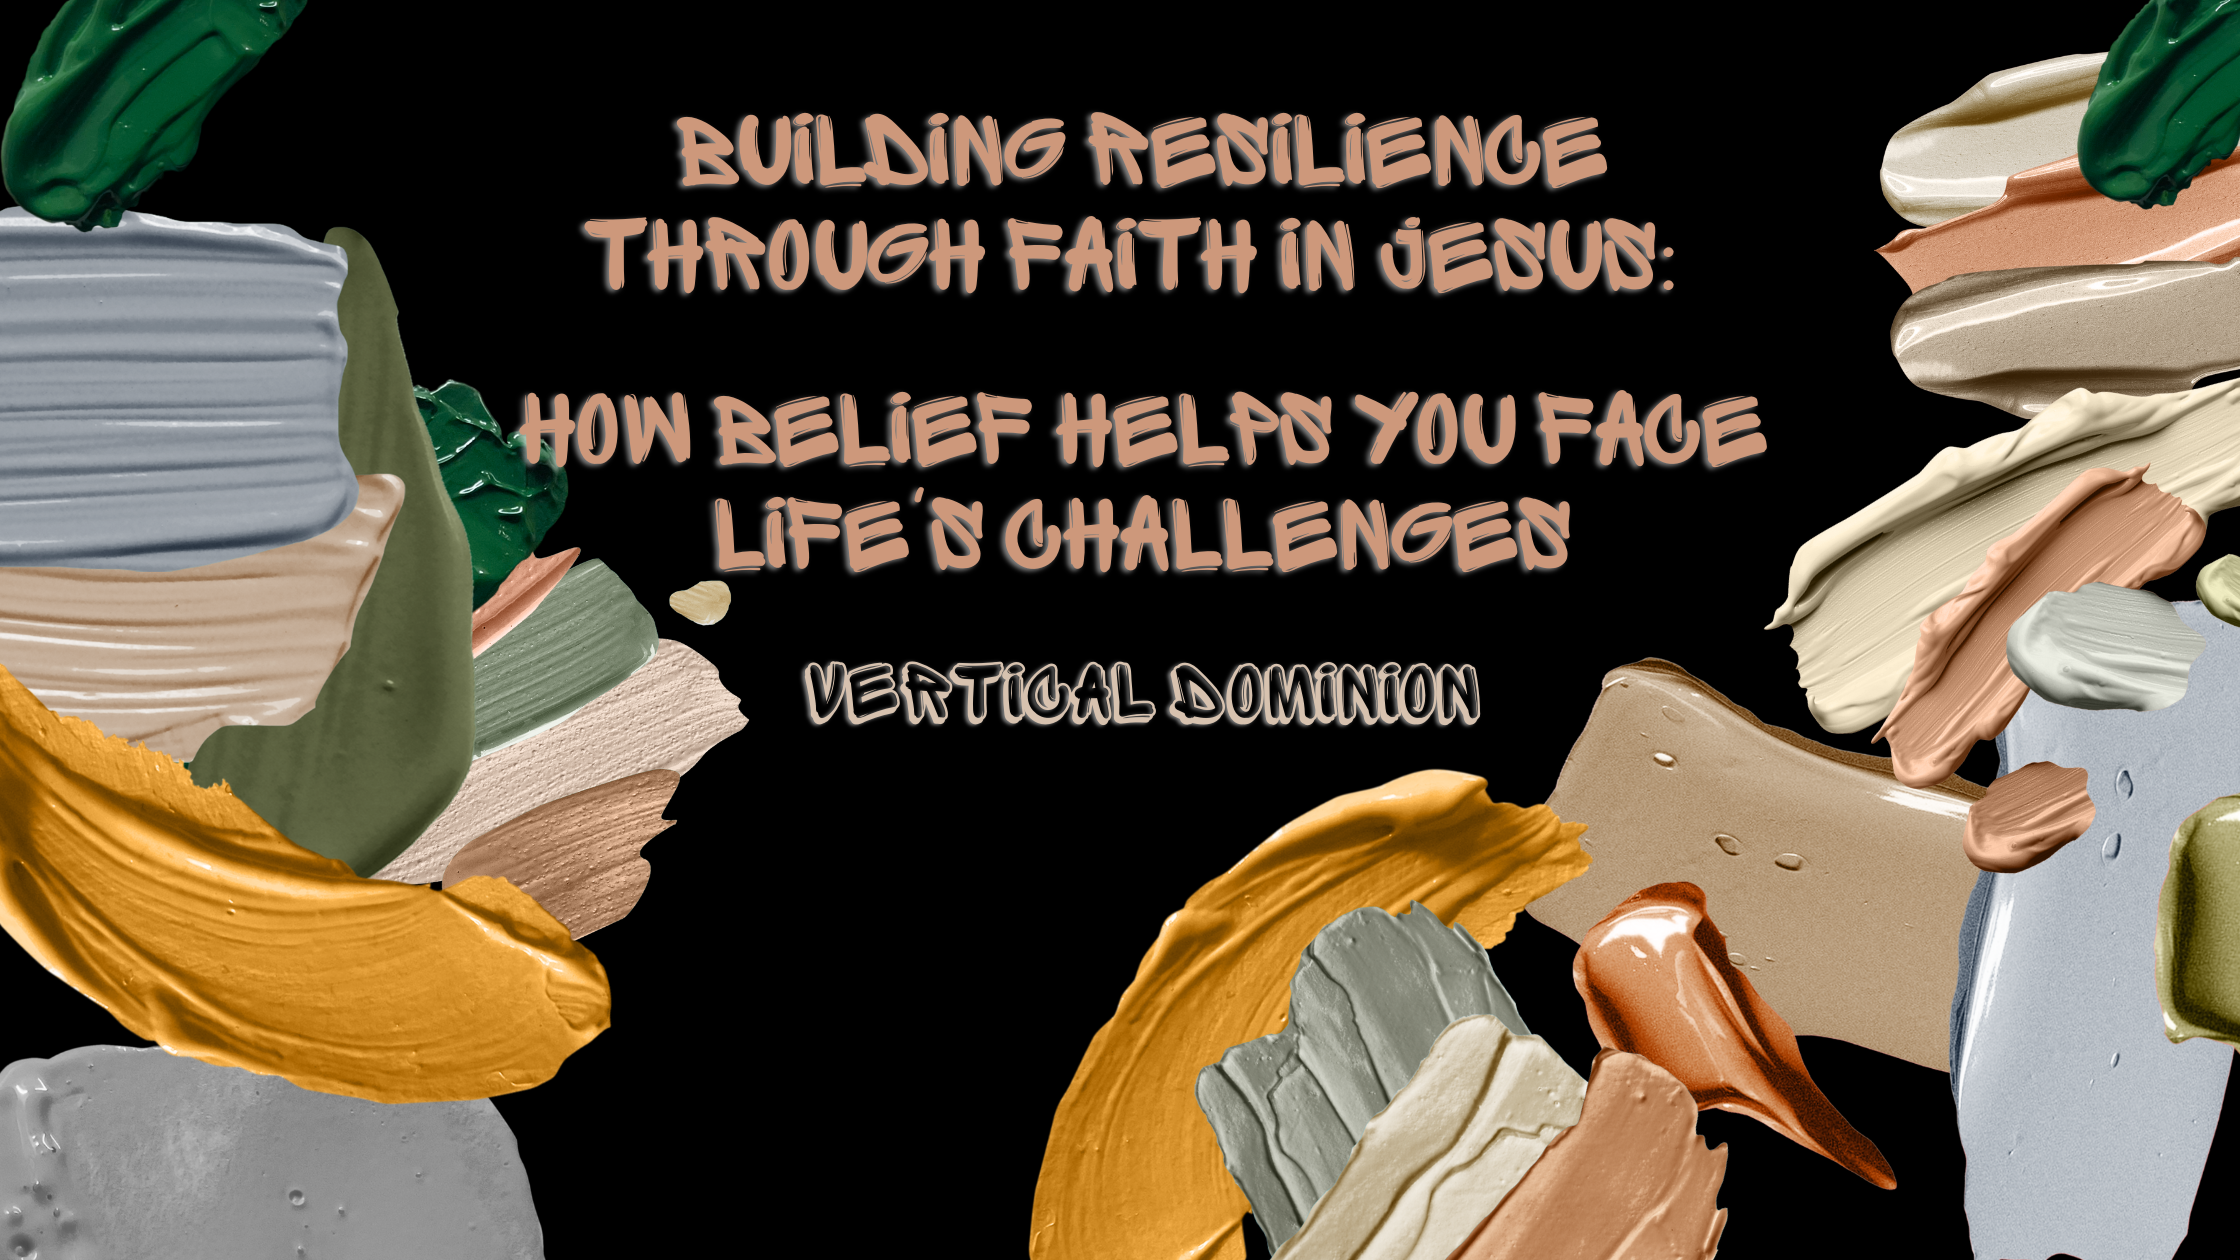 Building Resilience Through Faith in Jesus: How Belief Helps You Face Life's Challenges